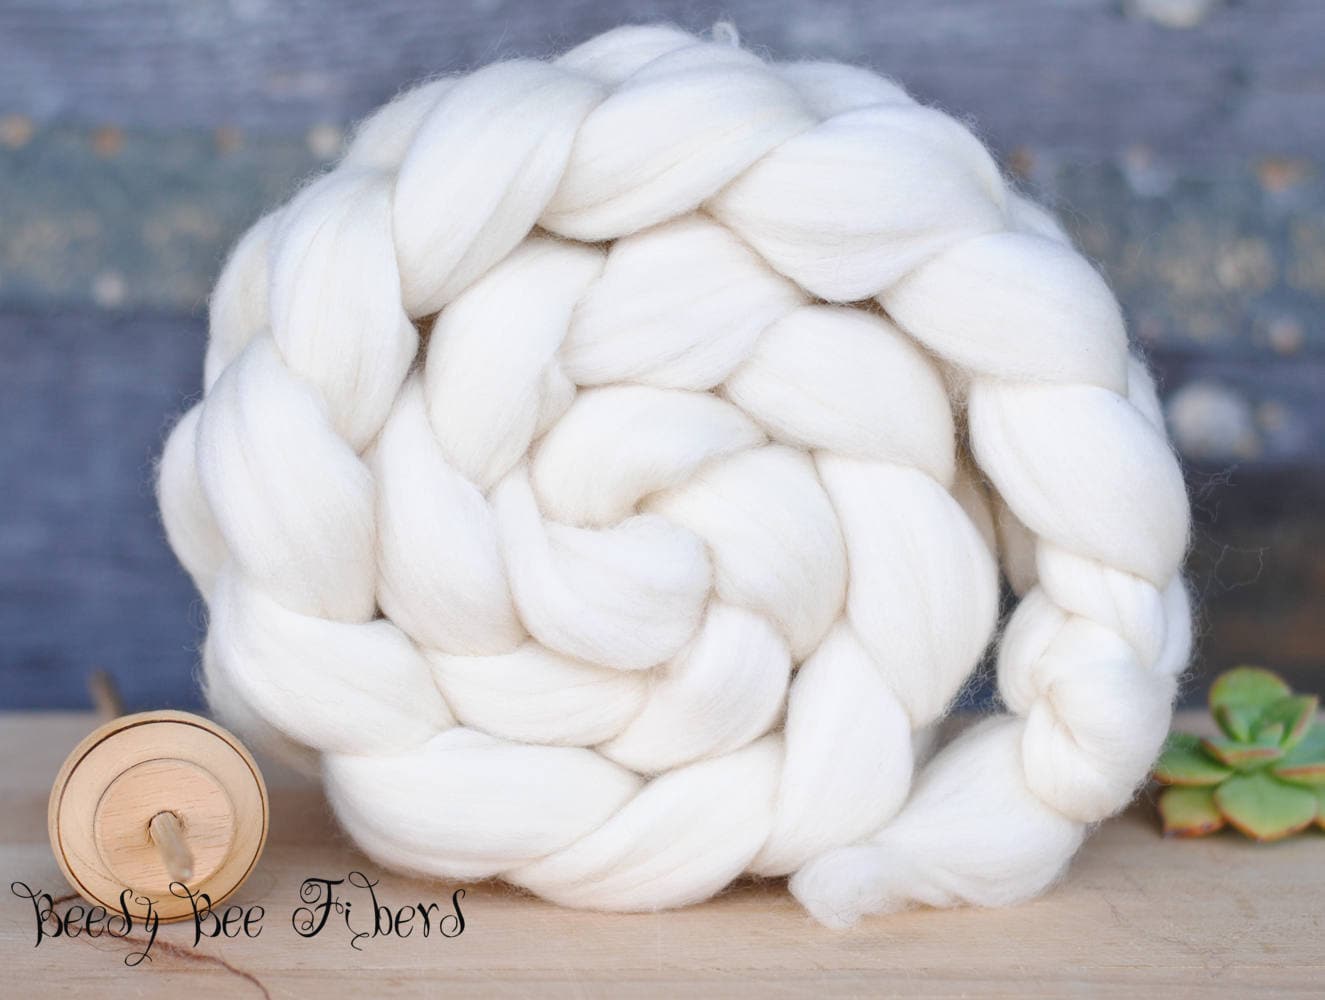 BFL Undyed Wool Roving Natural Ecru White Combed Top Natural Spinning Felting 4 